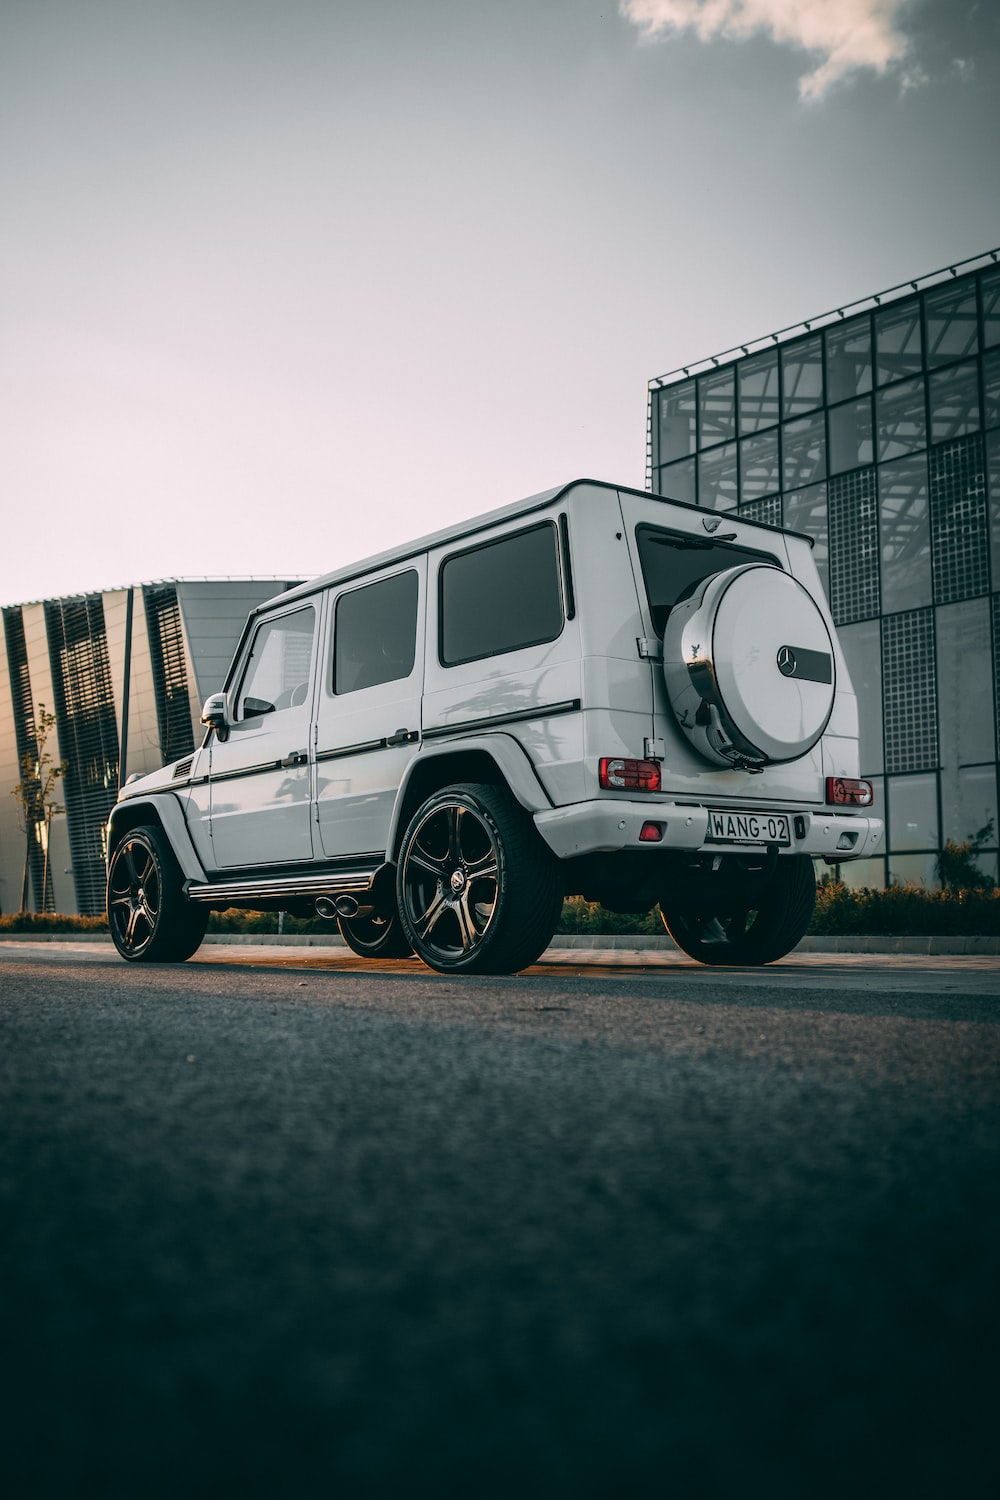 Mercedes G Wagon Picture. Download Free Image